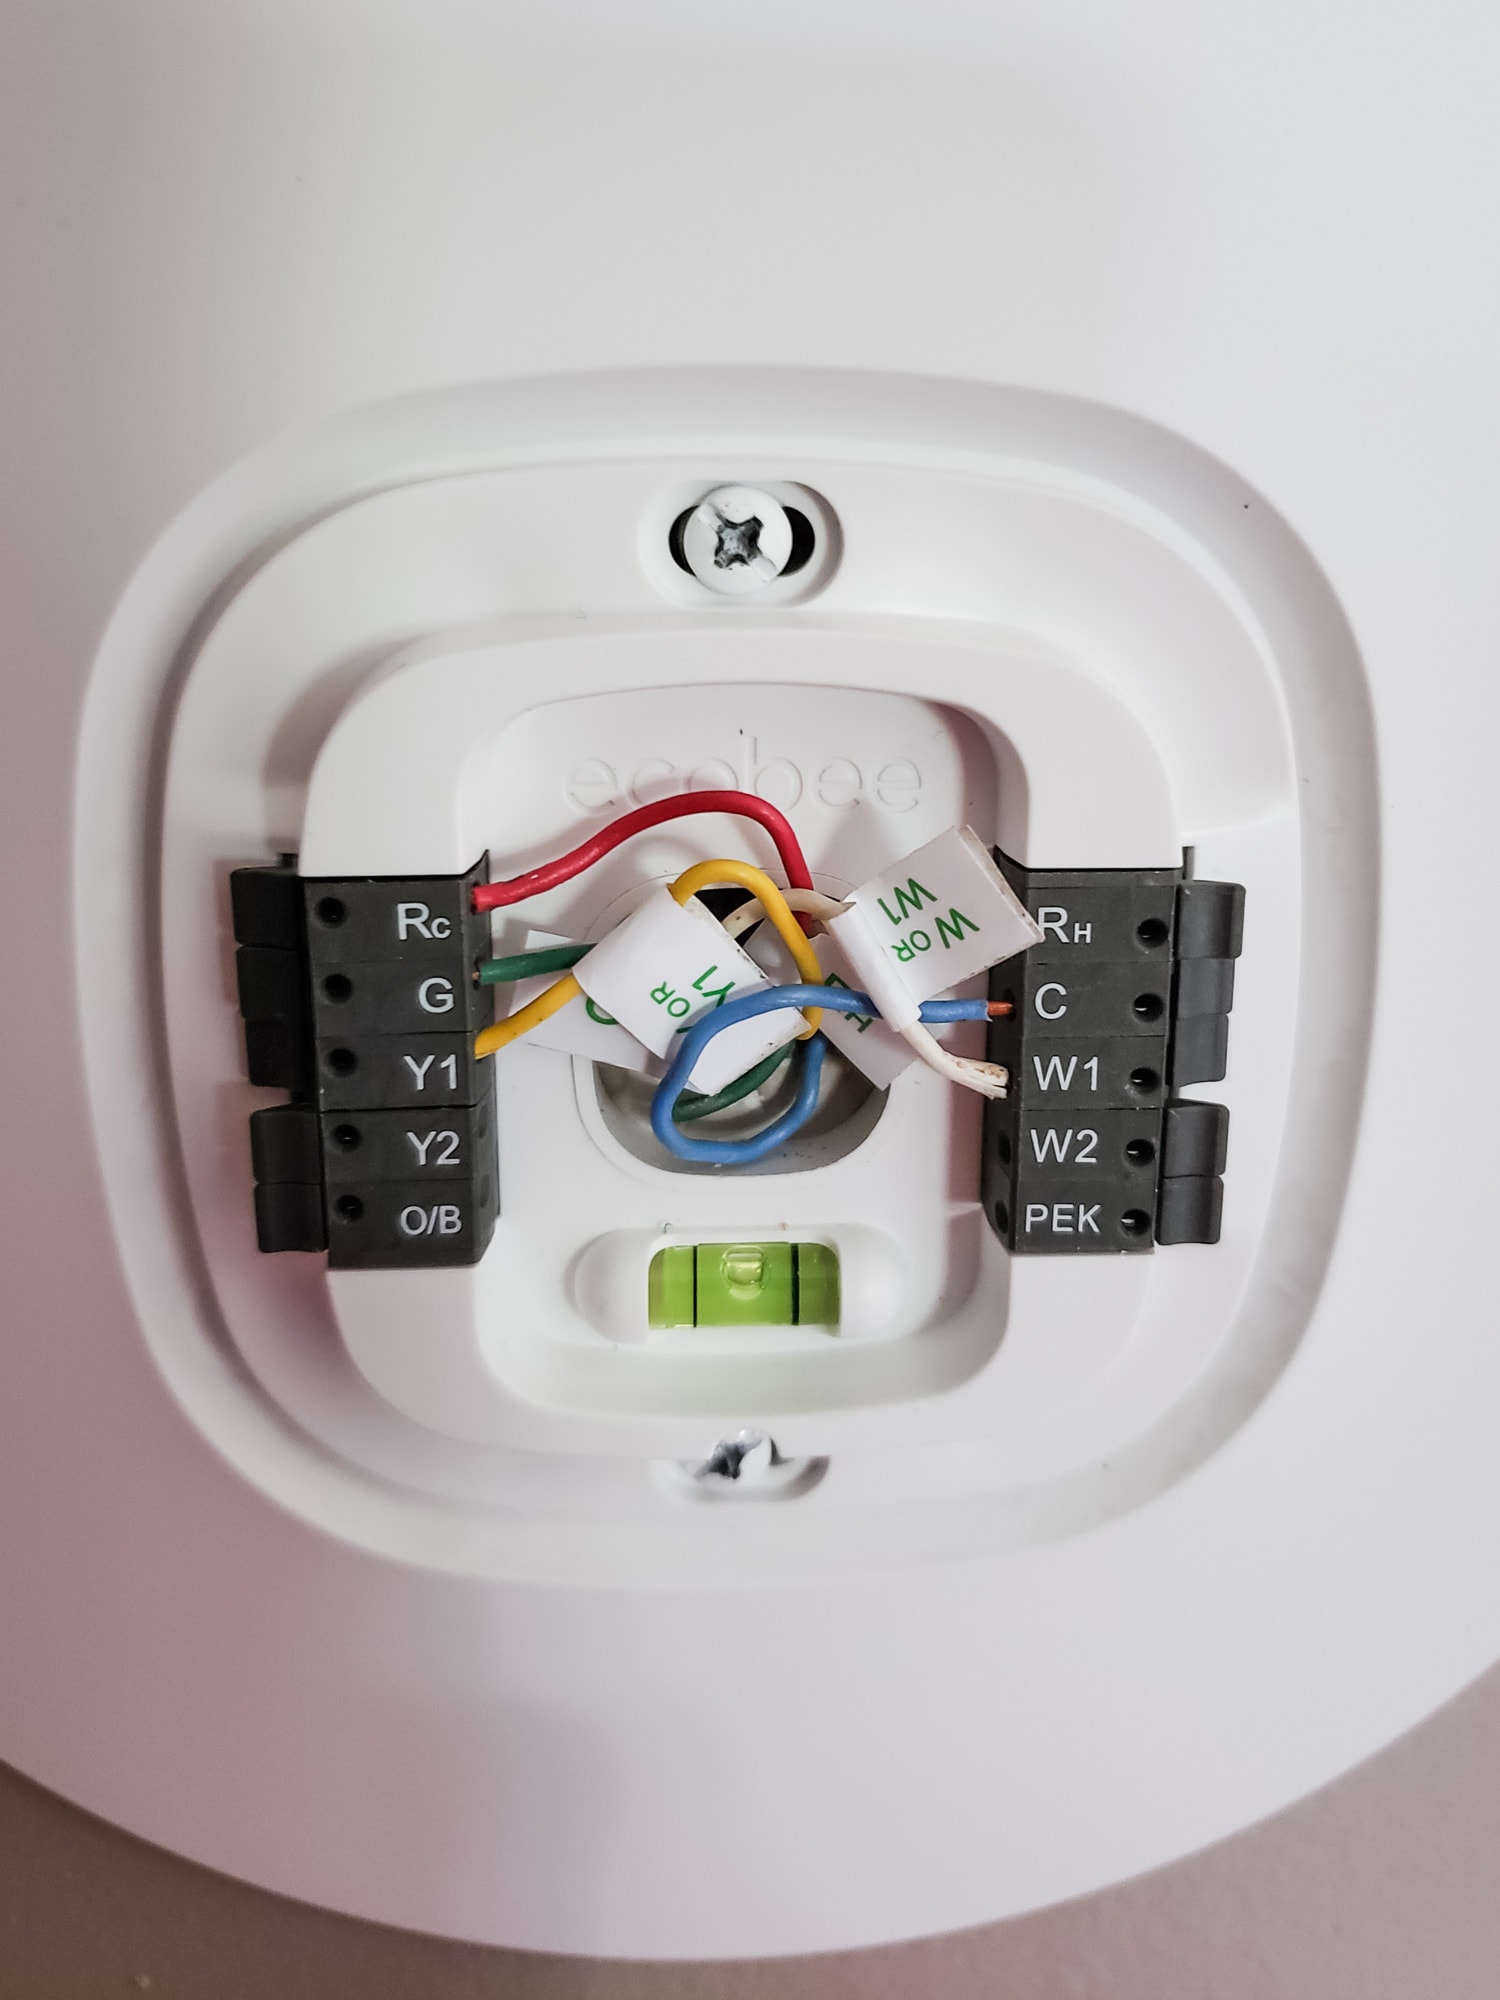 Ecobee WIFI thermostat wiring for a heat and air conditioning unit for more efficiency.